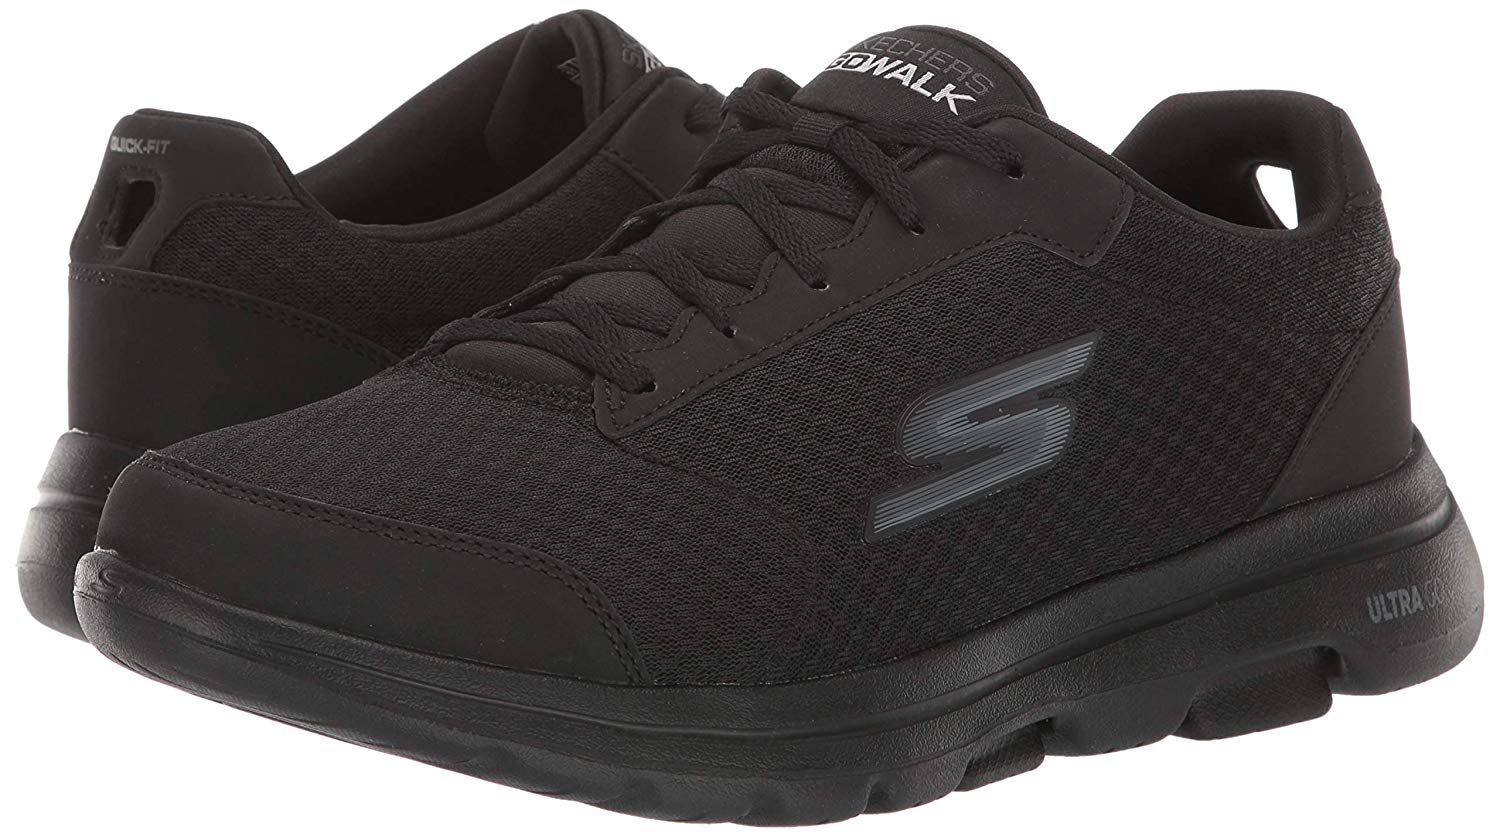 Skechers Women's Shoes Go walk 5-lucky Fabric Low Top Lace Up, Black ...